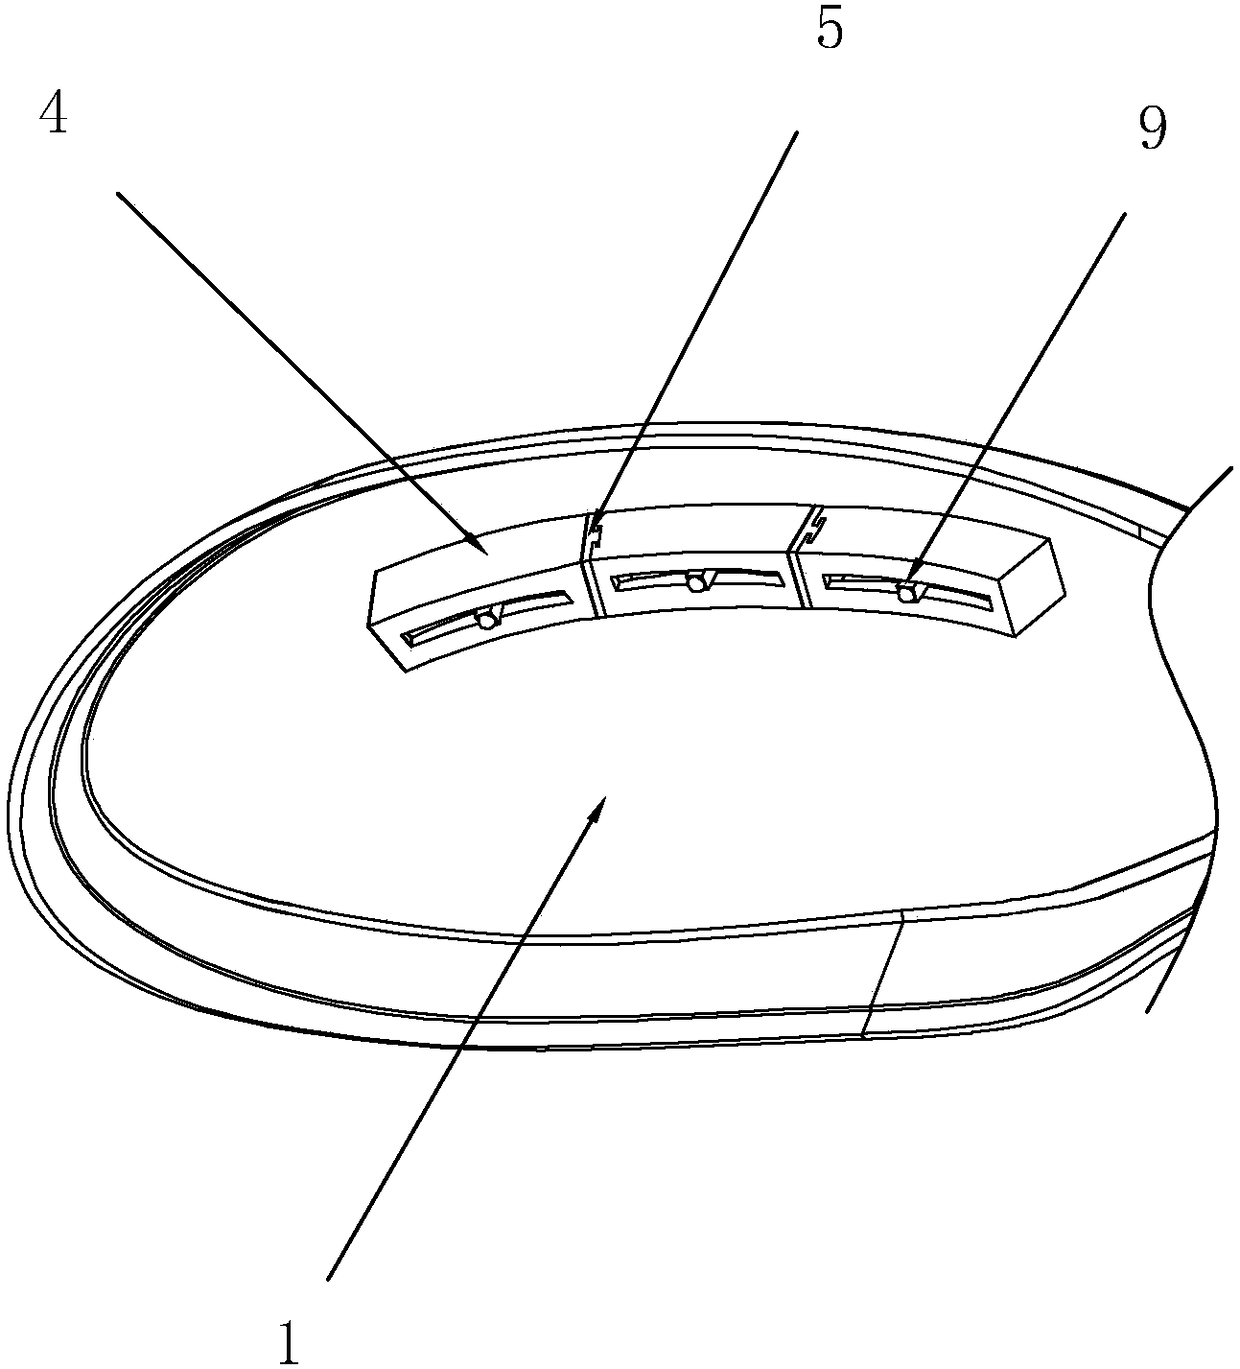 An eye massager adapted to different orbital sizes